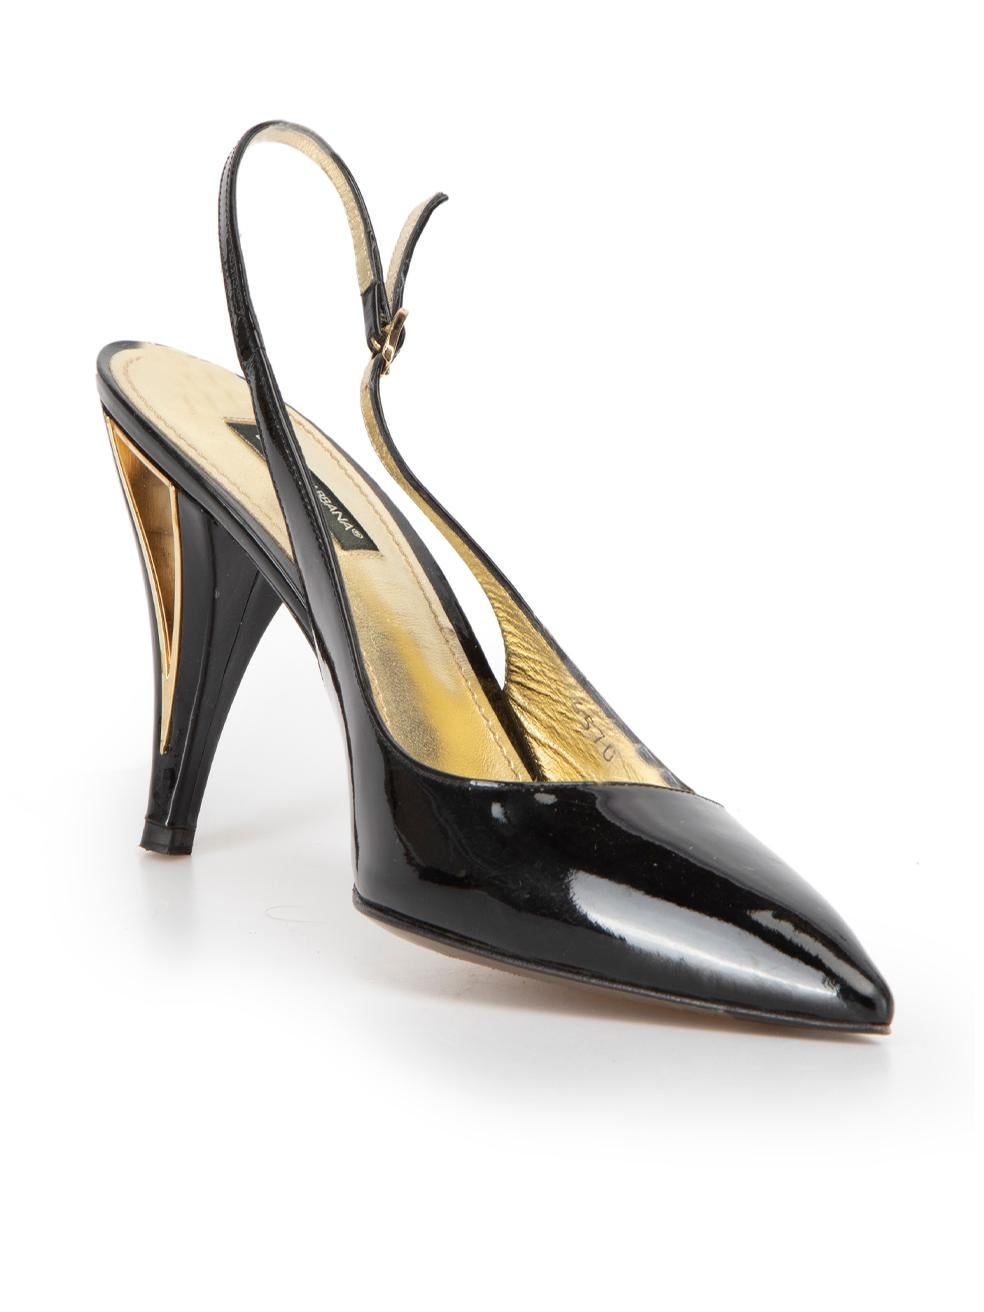 CONDITION is Very good. Minimal wear to heels is evident. Minimal wear to the patent exterior where faint marks and scuffs can be seen on this used Dolce & Gabbana designer resale item. 
 
 Details
  Black
 Patent leather
 Slingback heels
 Pointed